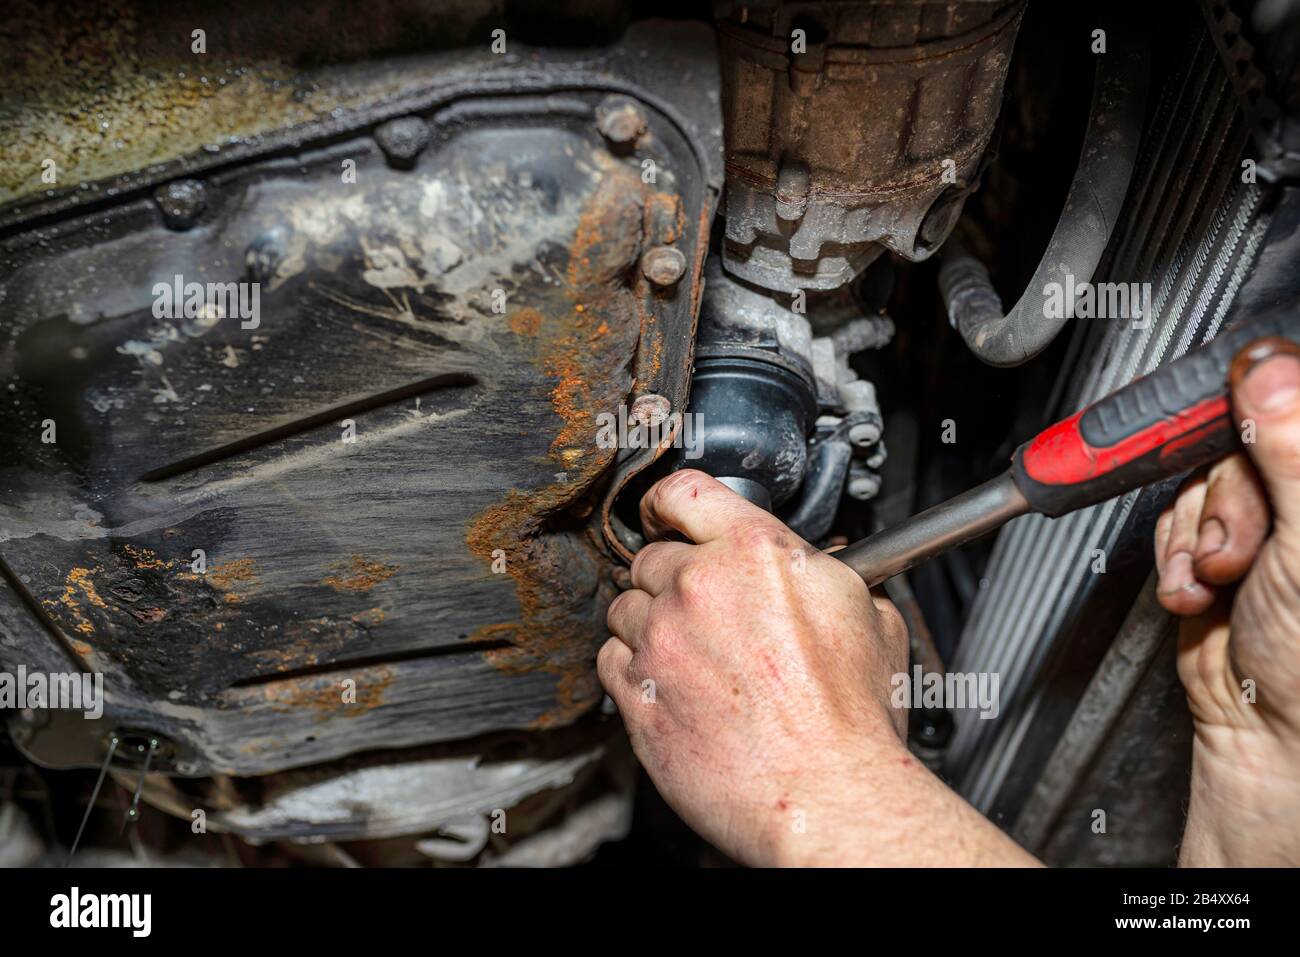 https://c8.alamy.com/comp/2B4XX64/the-car-mechanic-unscrews-the-diesel-filter-next-to-the-oil-pan-with-a-metal-wrench-visible-man-hands-2B4XX64.jpg